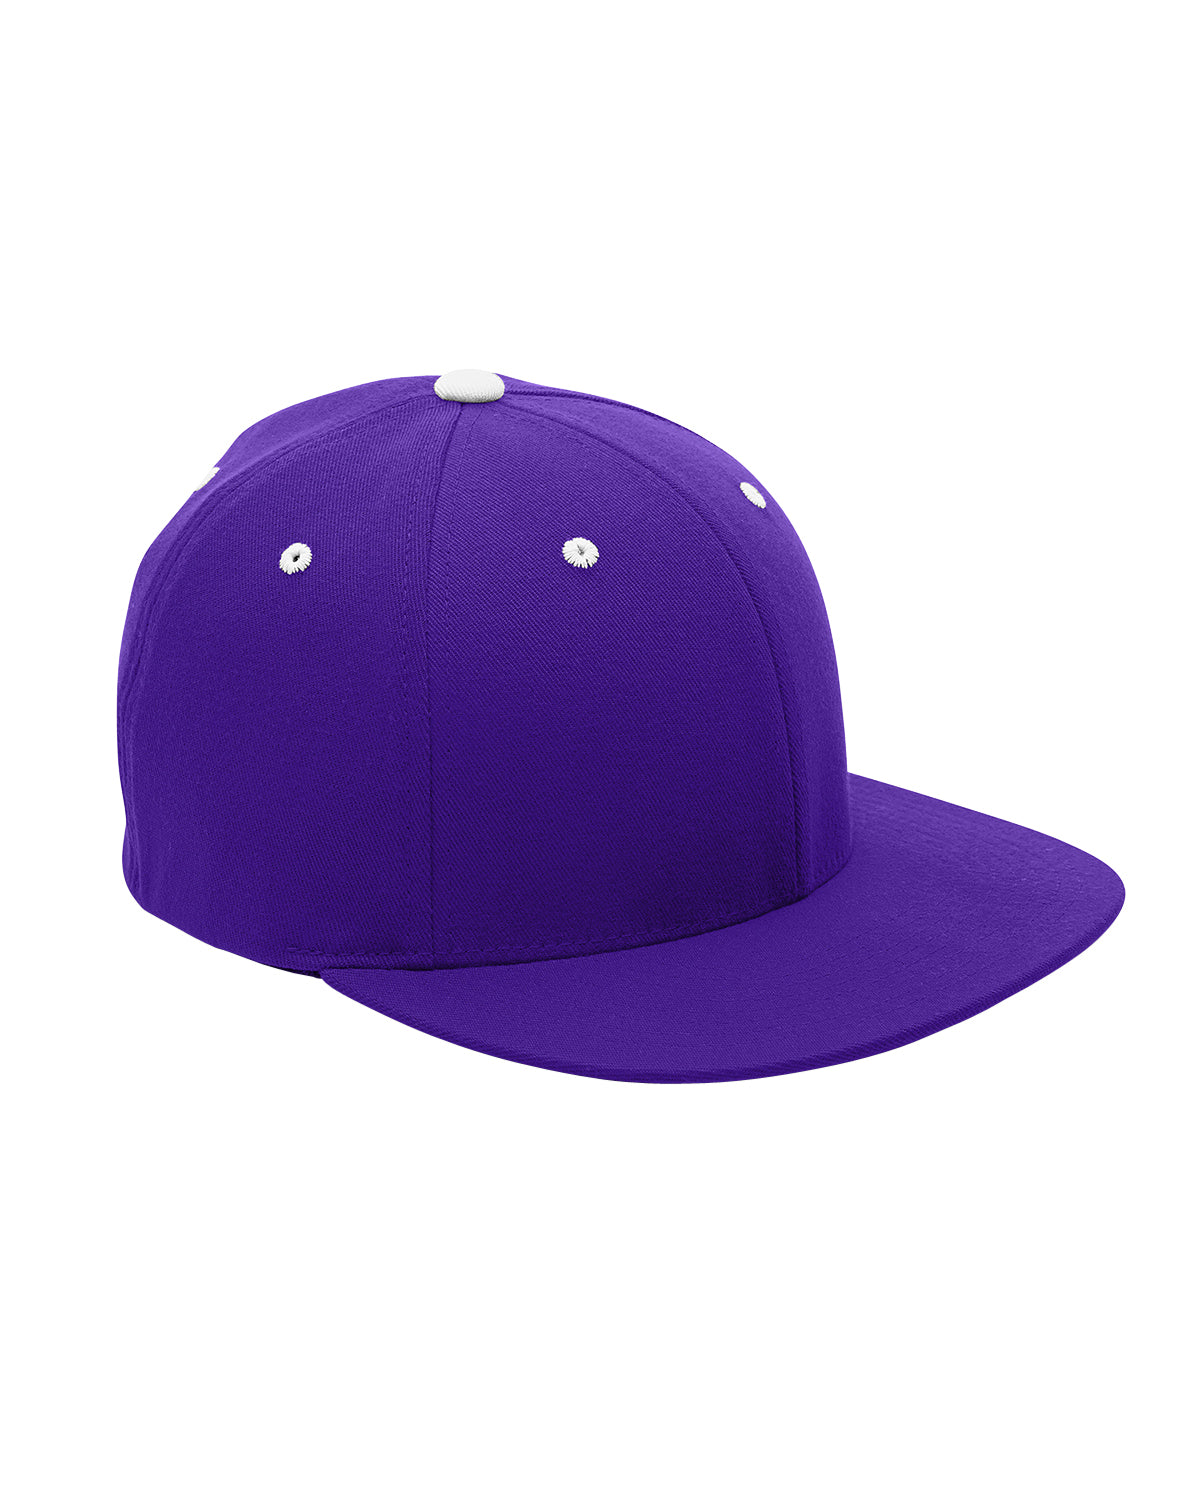 Team 365 ATB101 Mens Moisture Wicking Stretch Fit Hat Purple Front